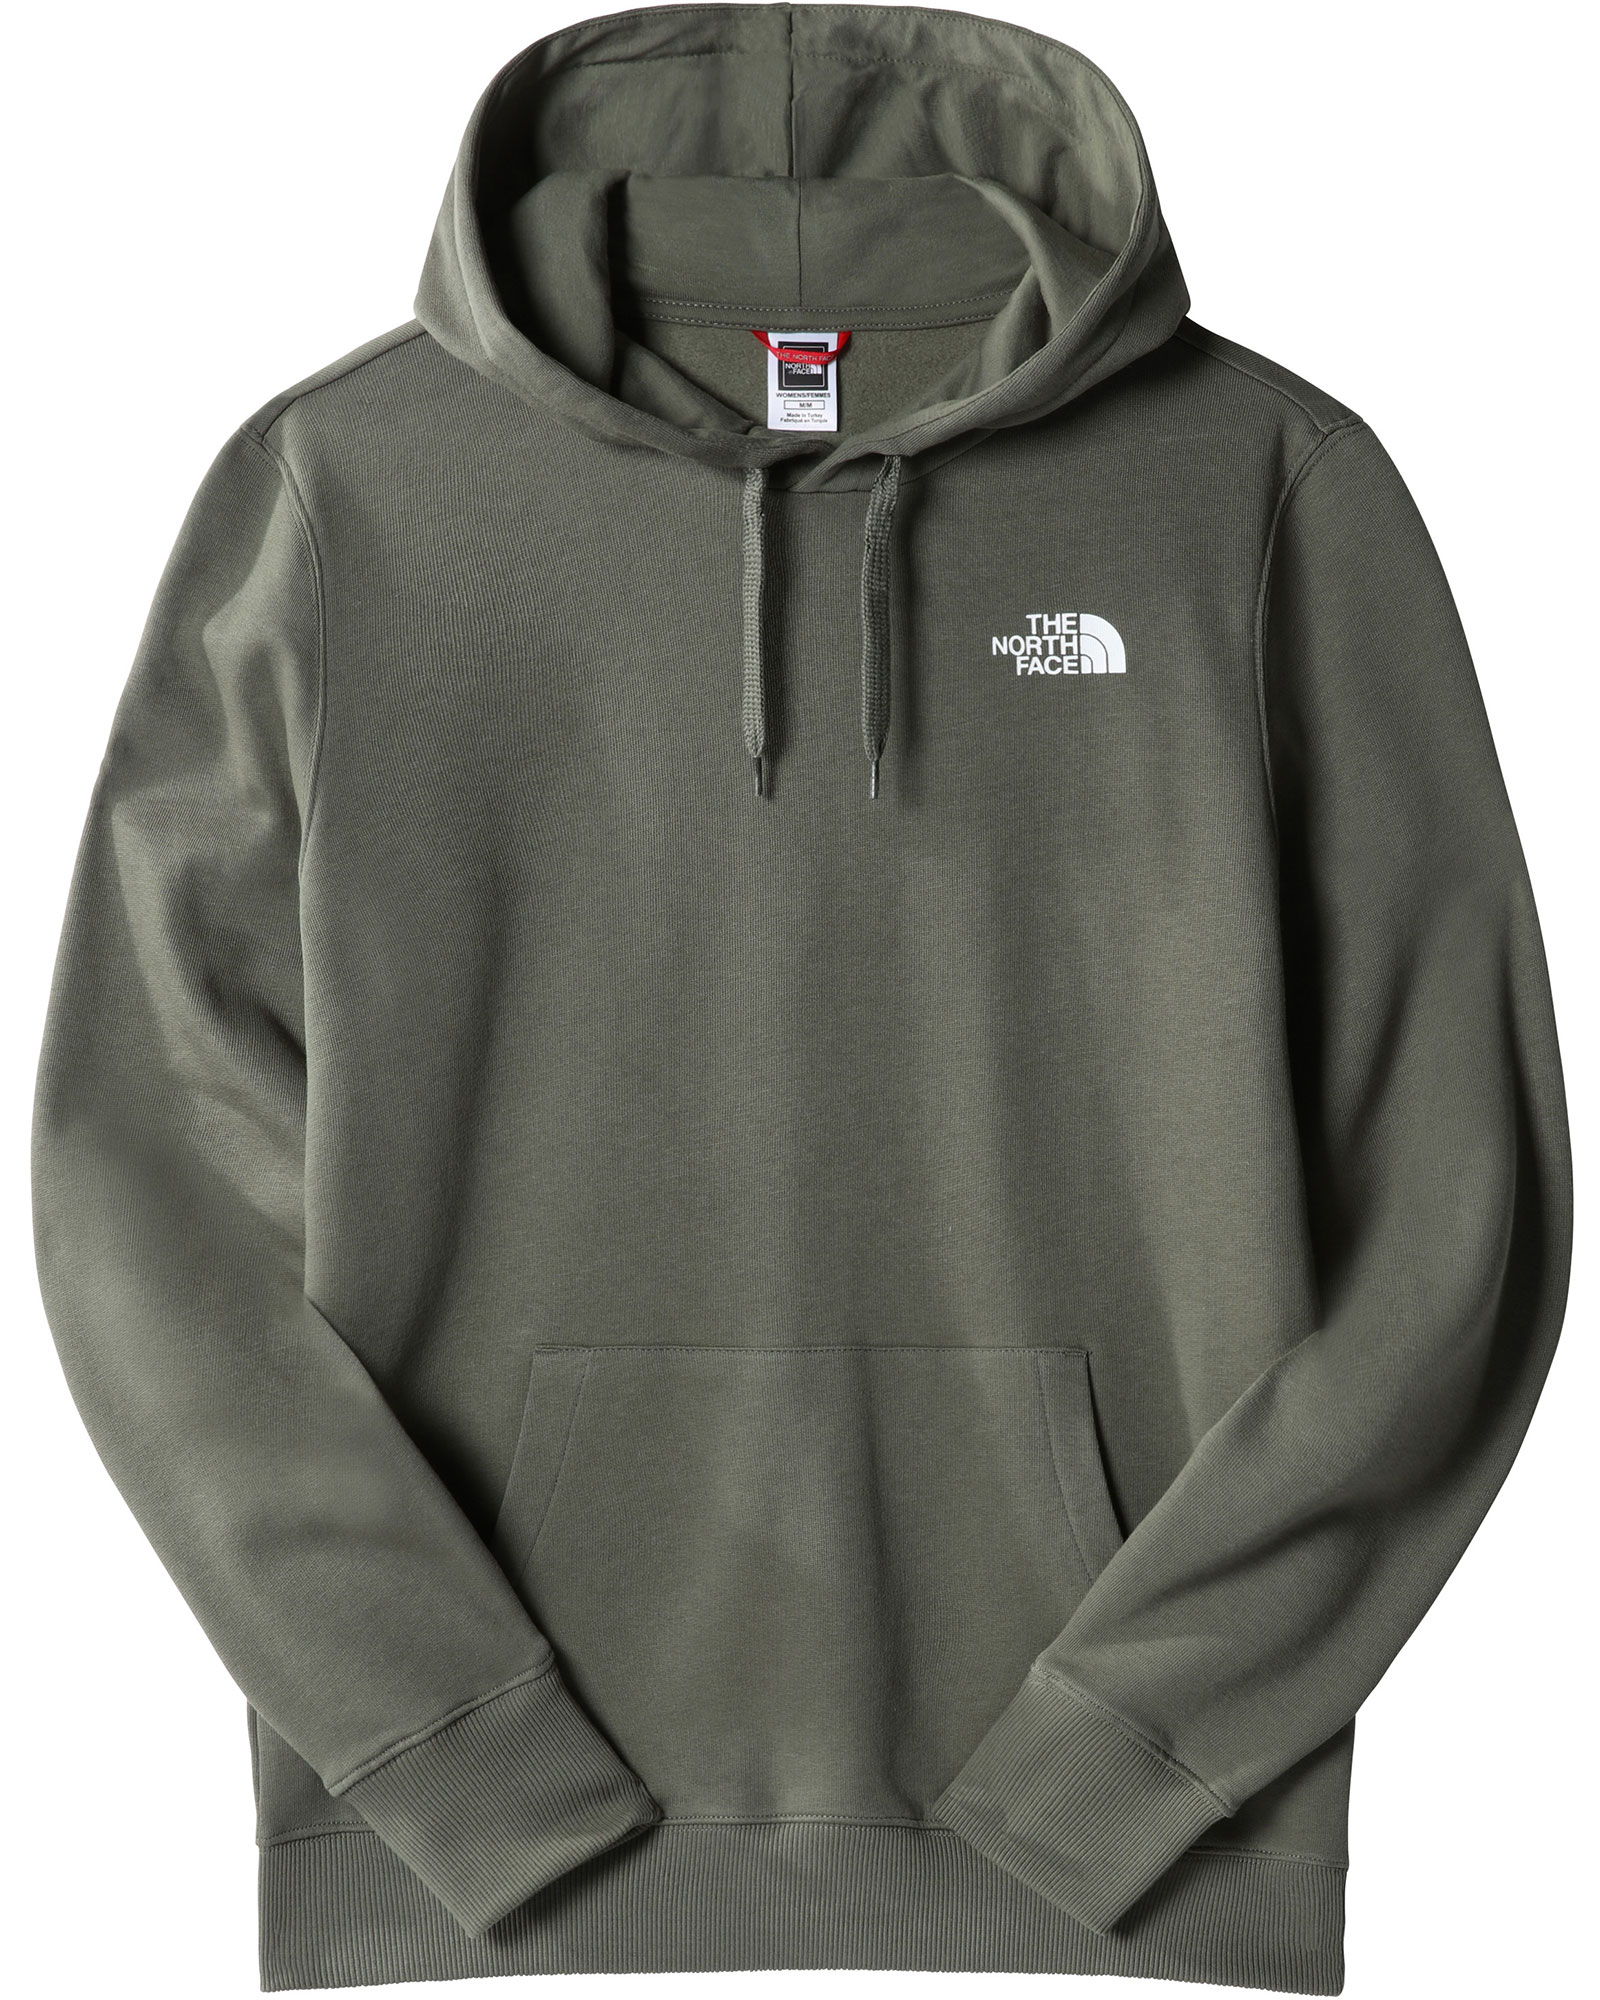 The North Face Simple Dome Women's Hoodie | Ellis Brigham Mountain Sports